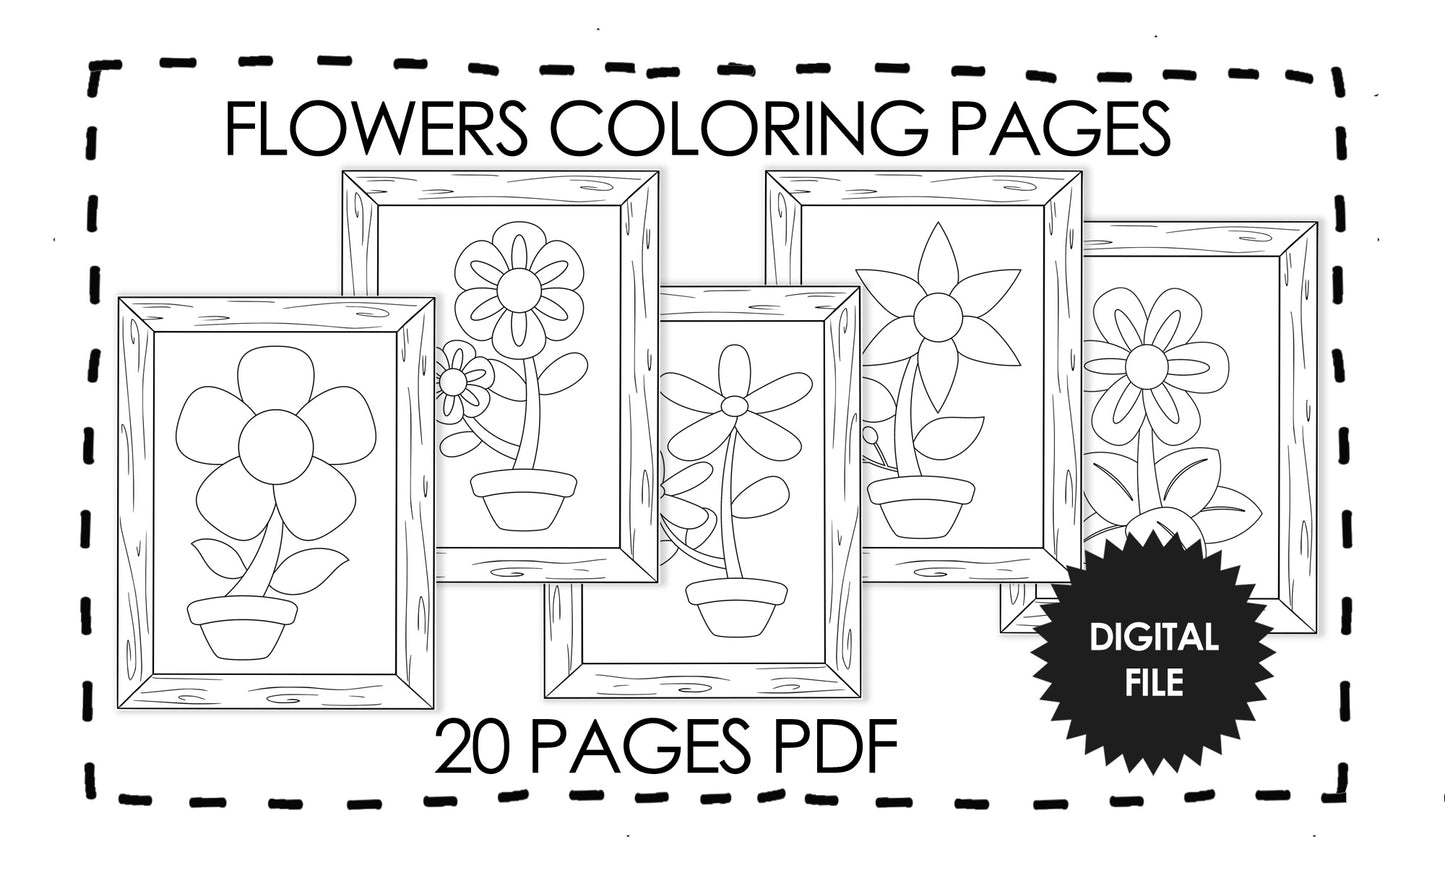 Flowers Coloring Pages For Kids, Wooden Frame, Ready to Hang on Wall, 20 Pages Coloring Book, Instant Download PDF Print At Home Letter Size